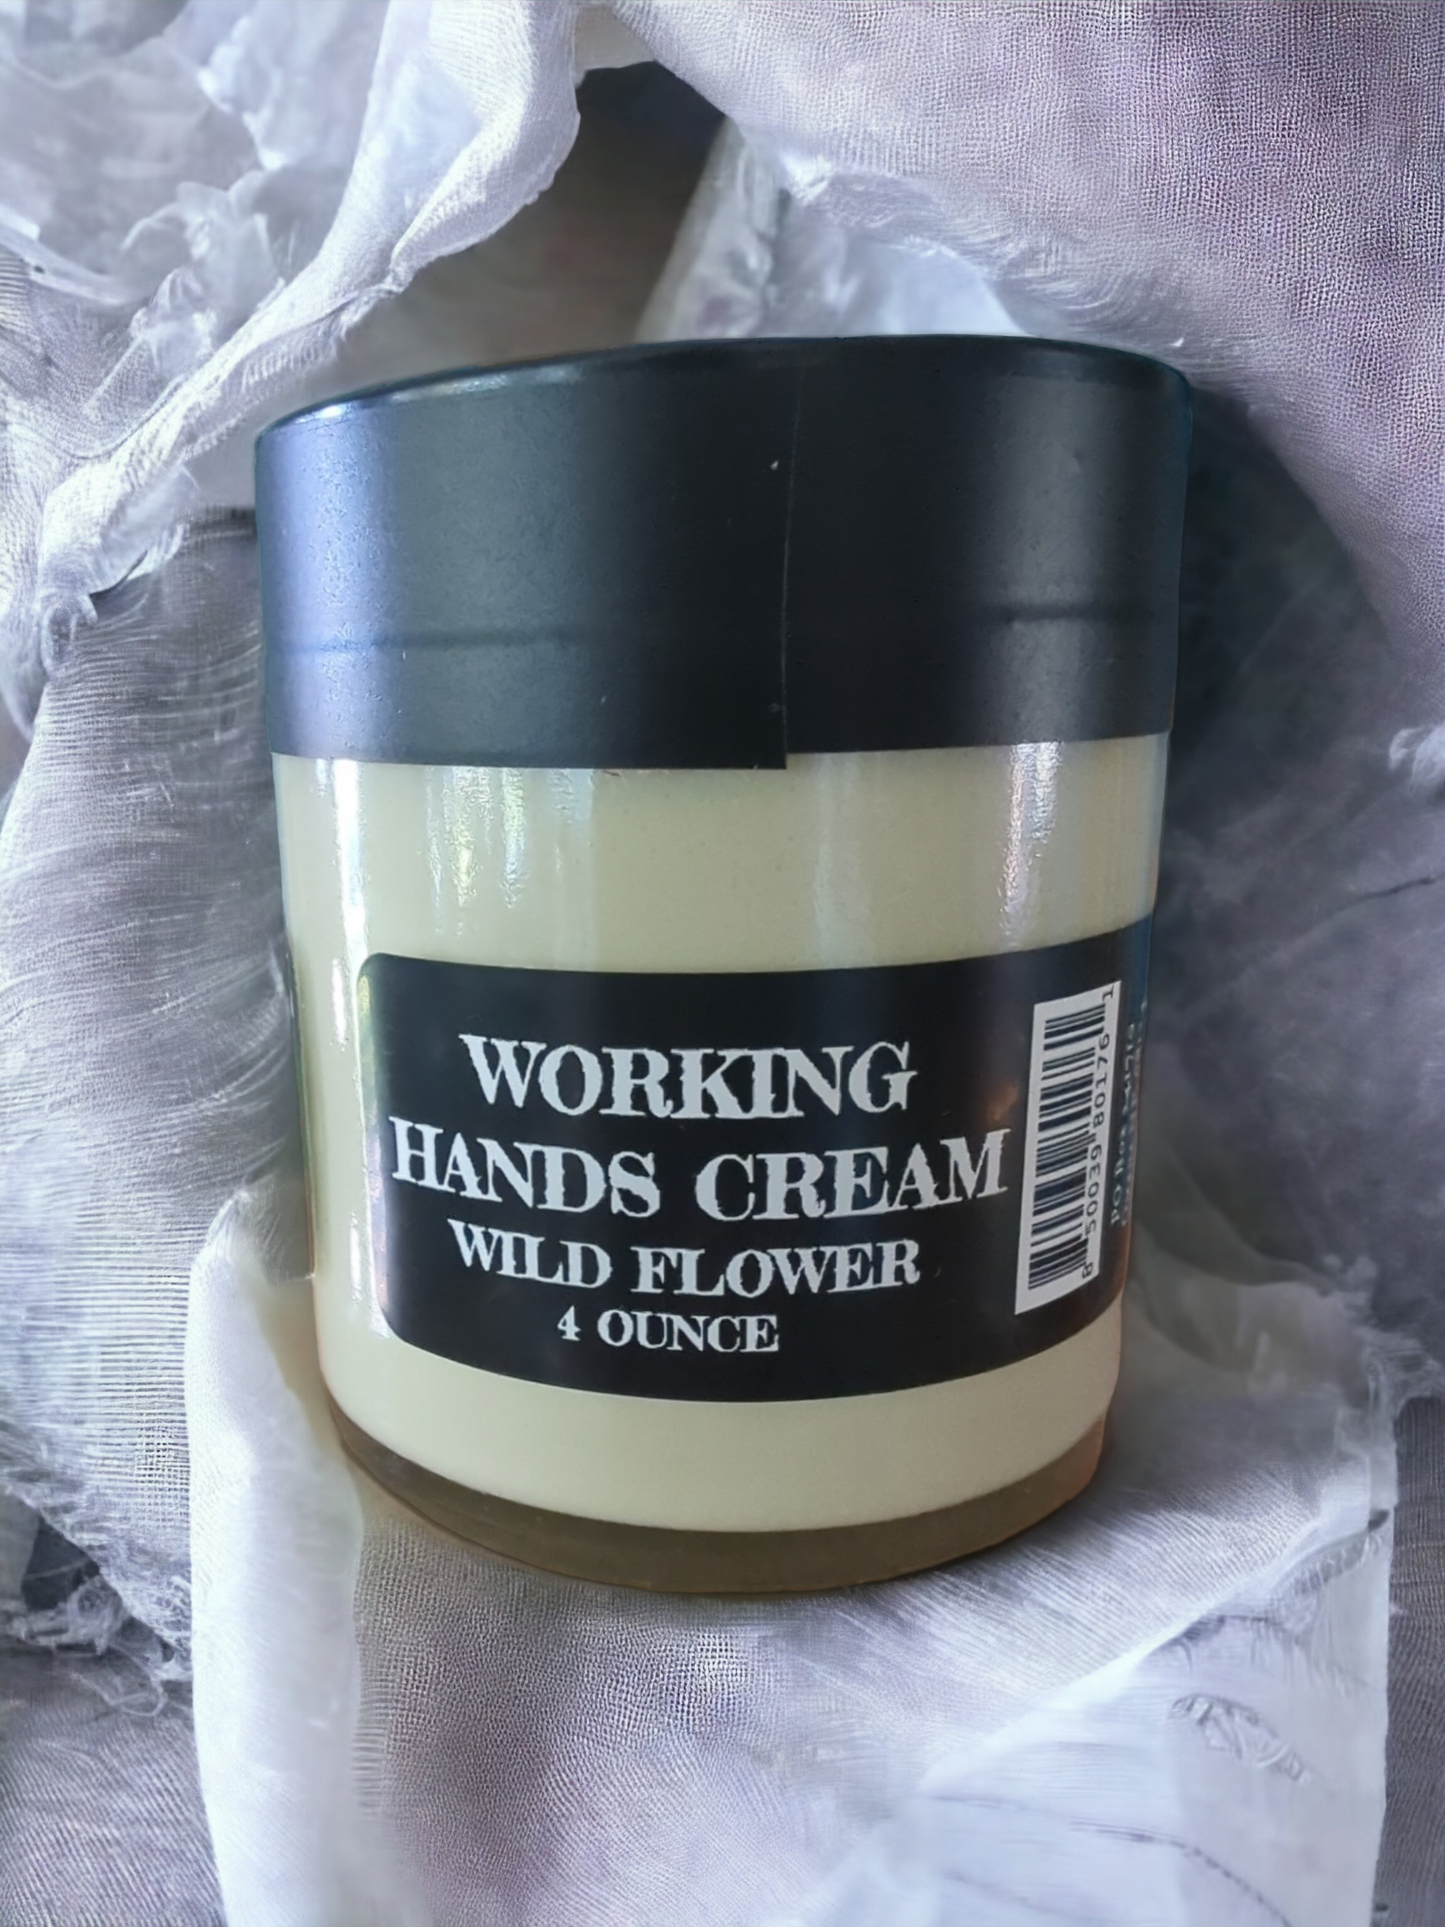 Working Hands cream, Wildflower, 4 ounce glass, Apothecuryous